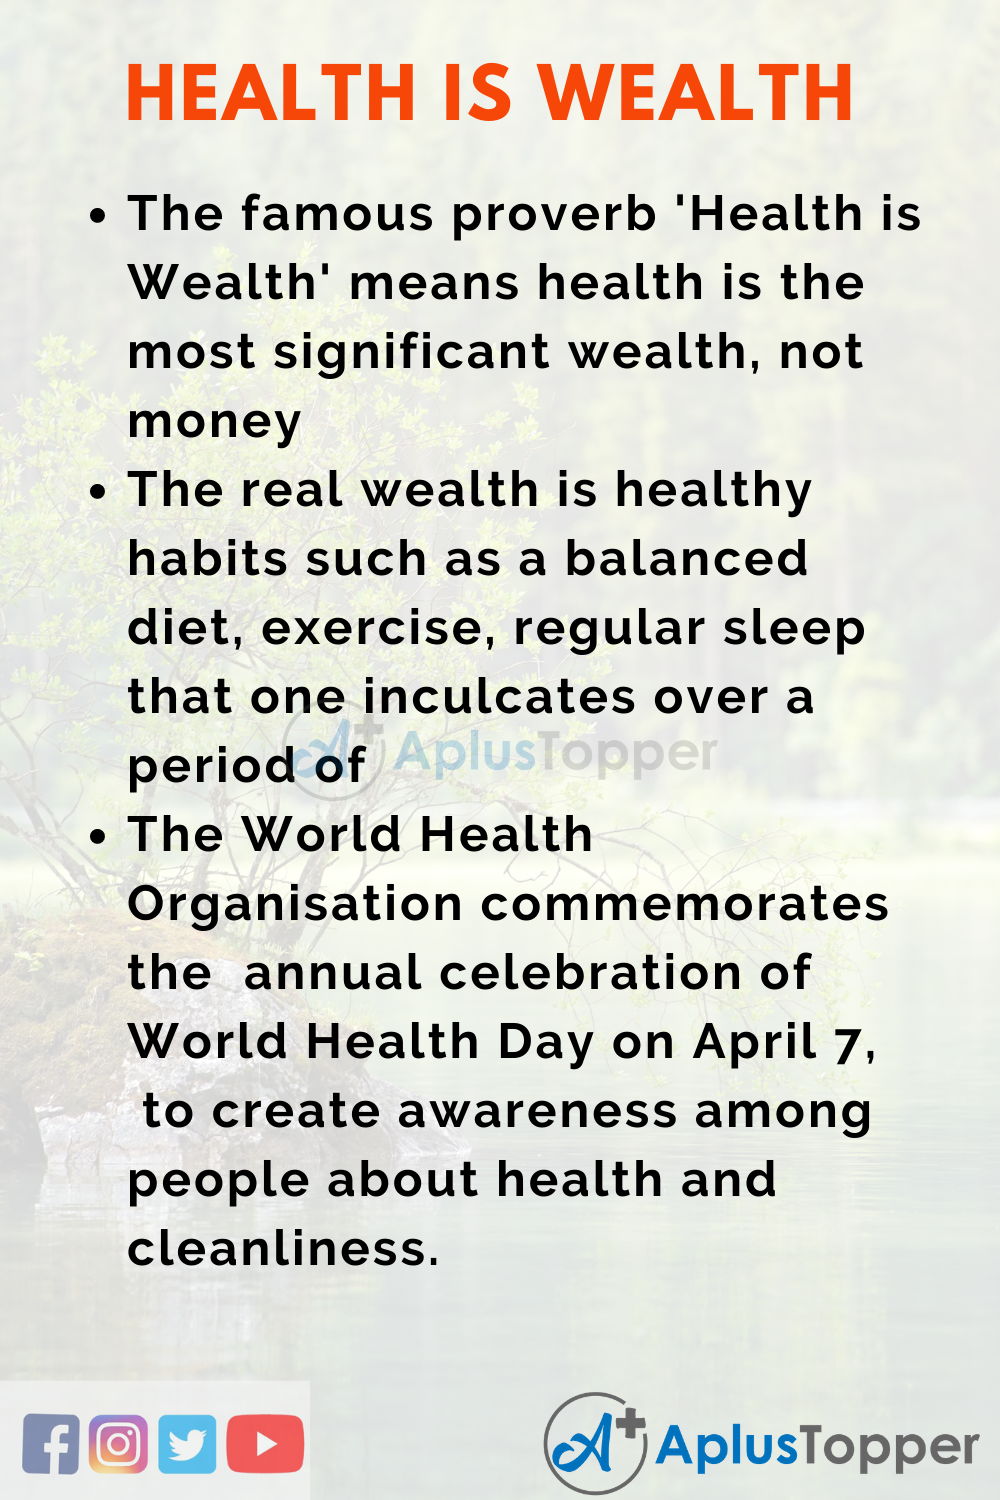 essay in health is wealth